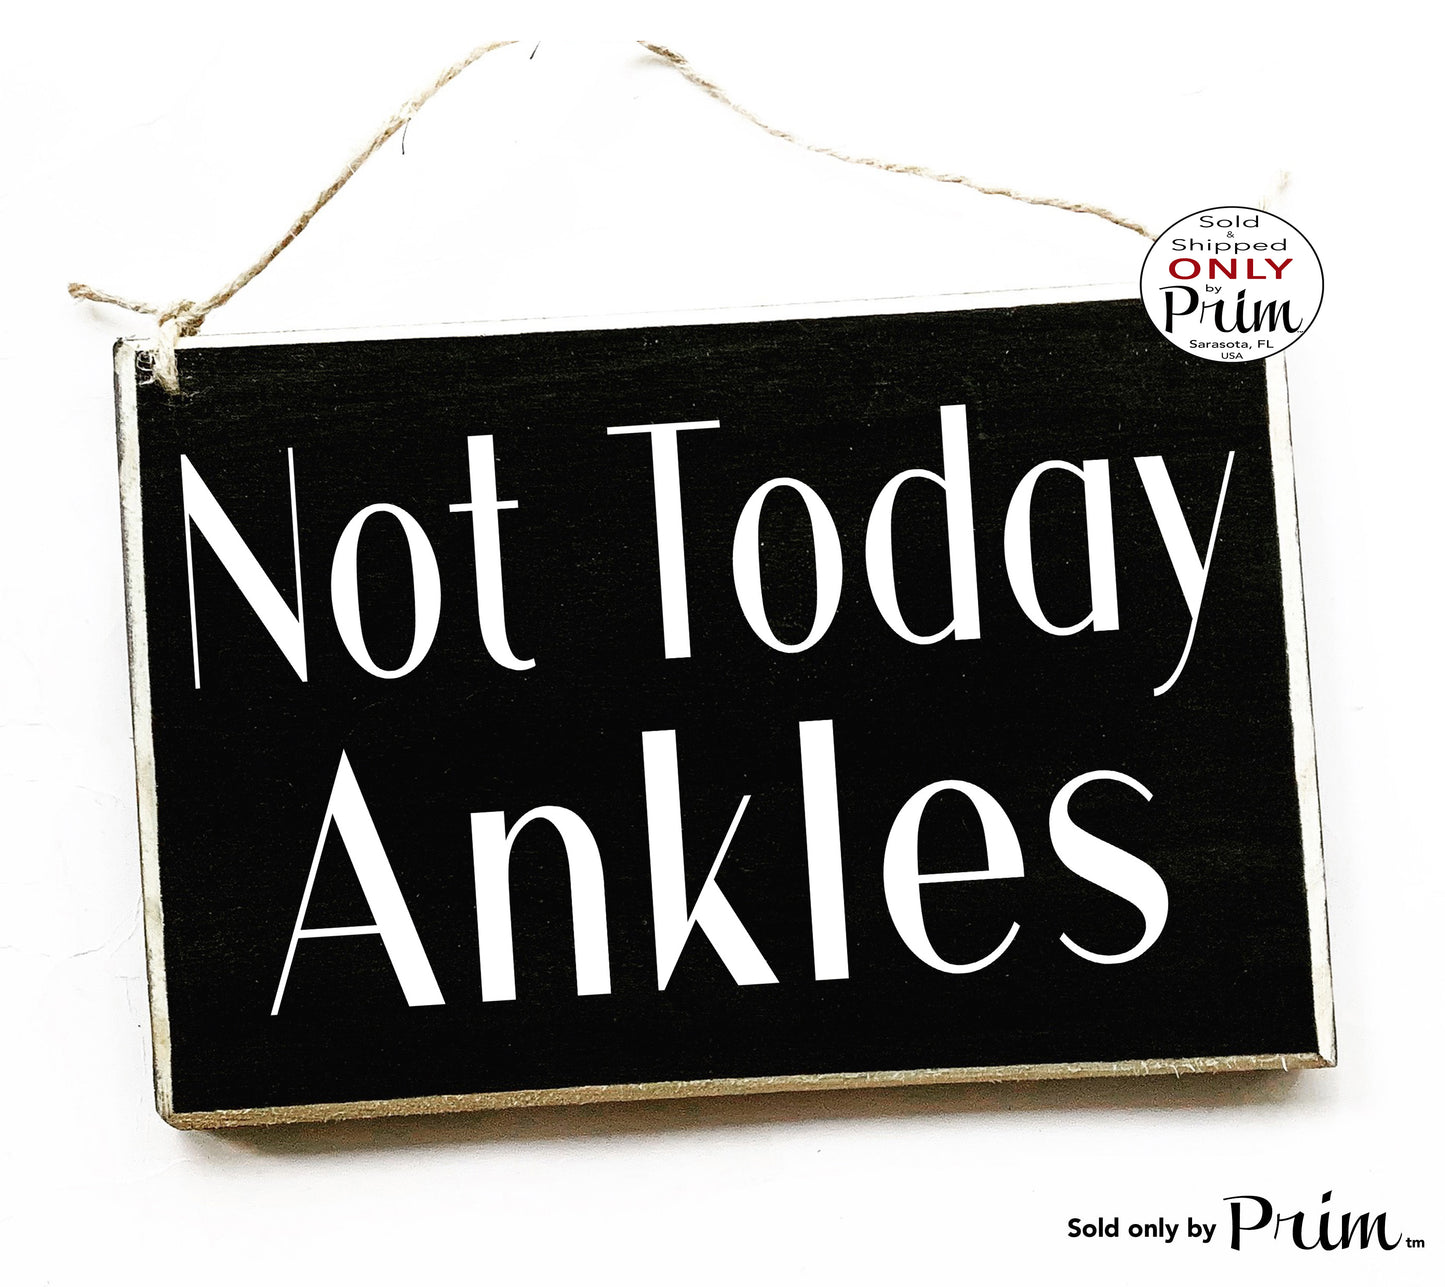 Designs by Prim 8x6 Not Today Ankles Candaice Dillard Basset Funny Custom Wood Sign | Real Housewives of Potomac Bravo Franchise Fan RHOP Plaque